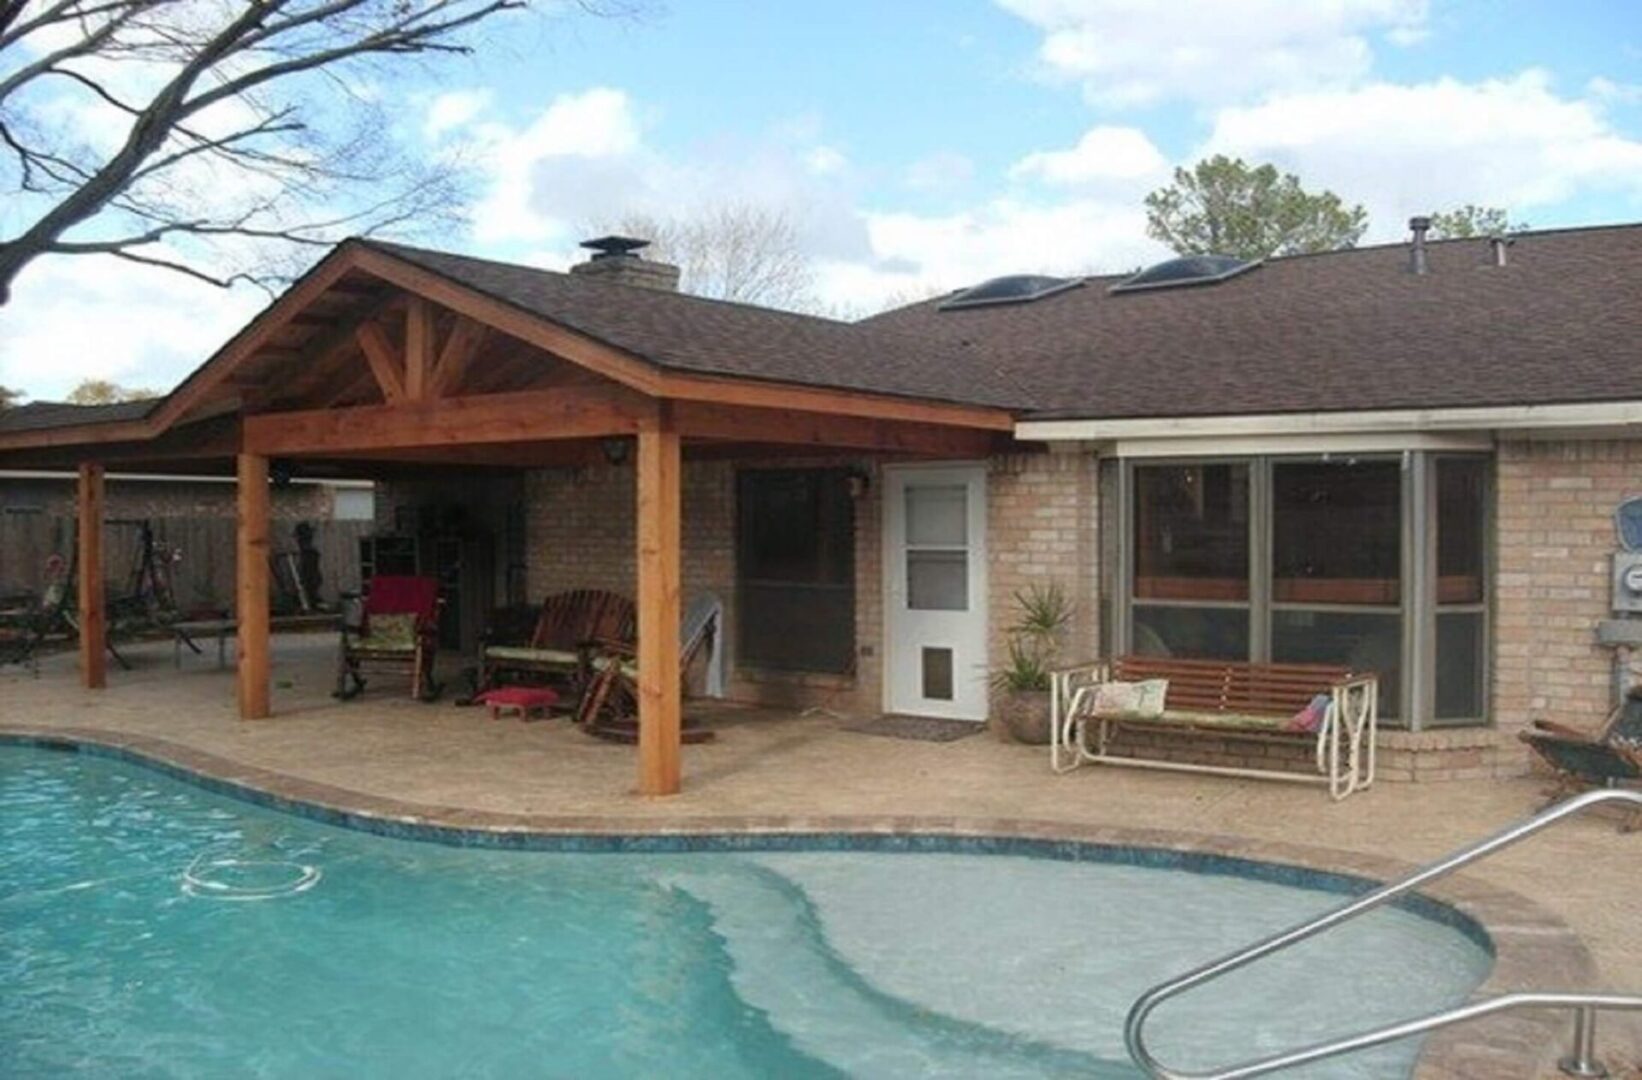 A pool house with a covered patio and swimming pool.